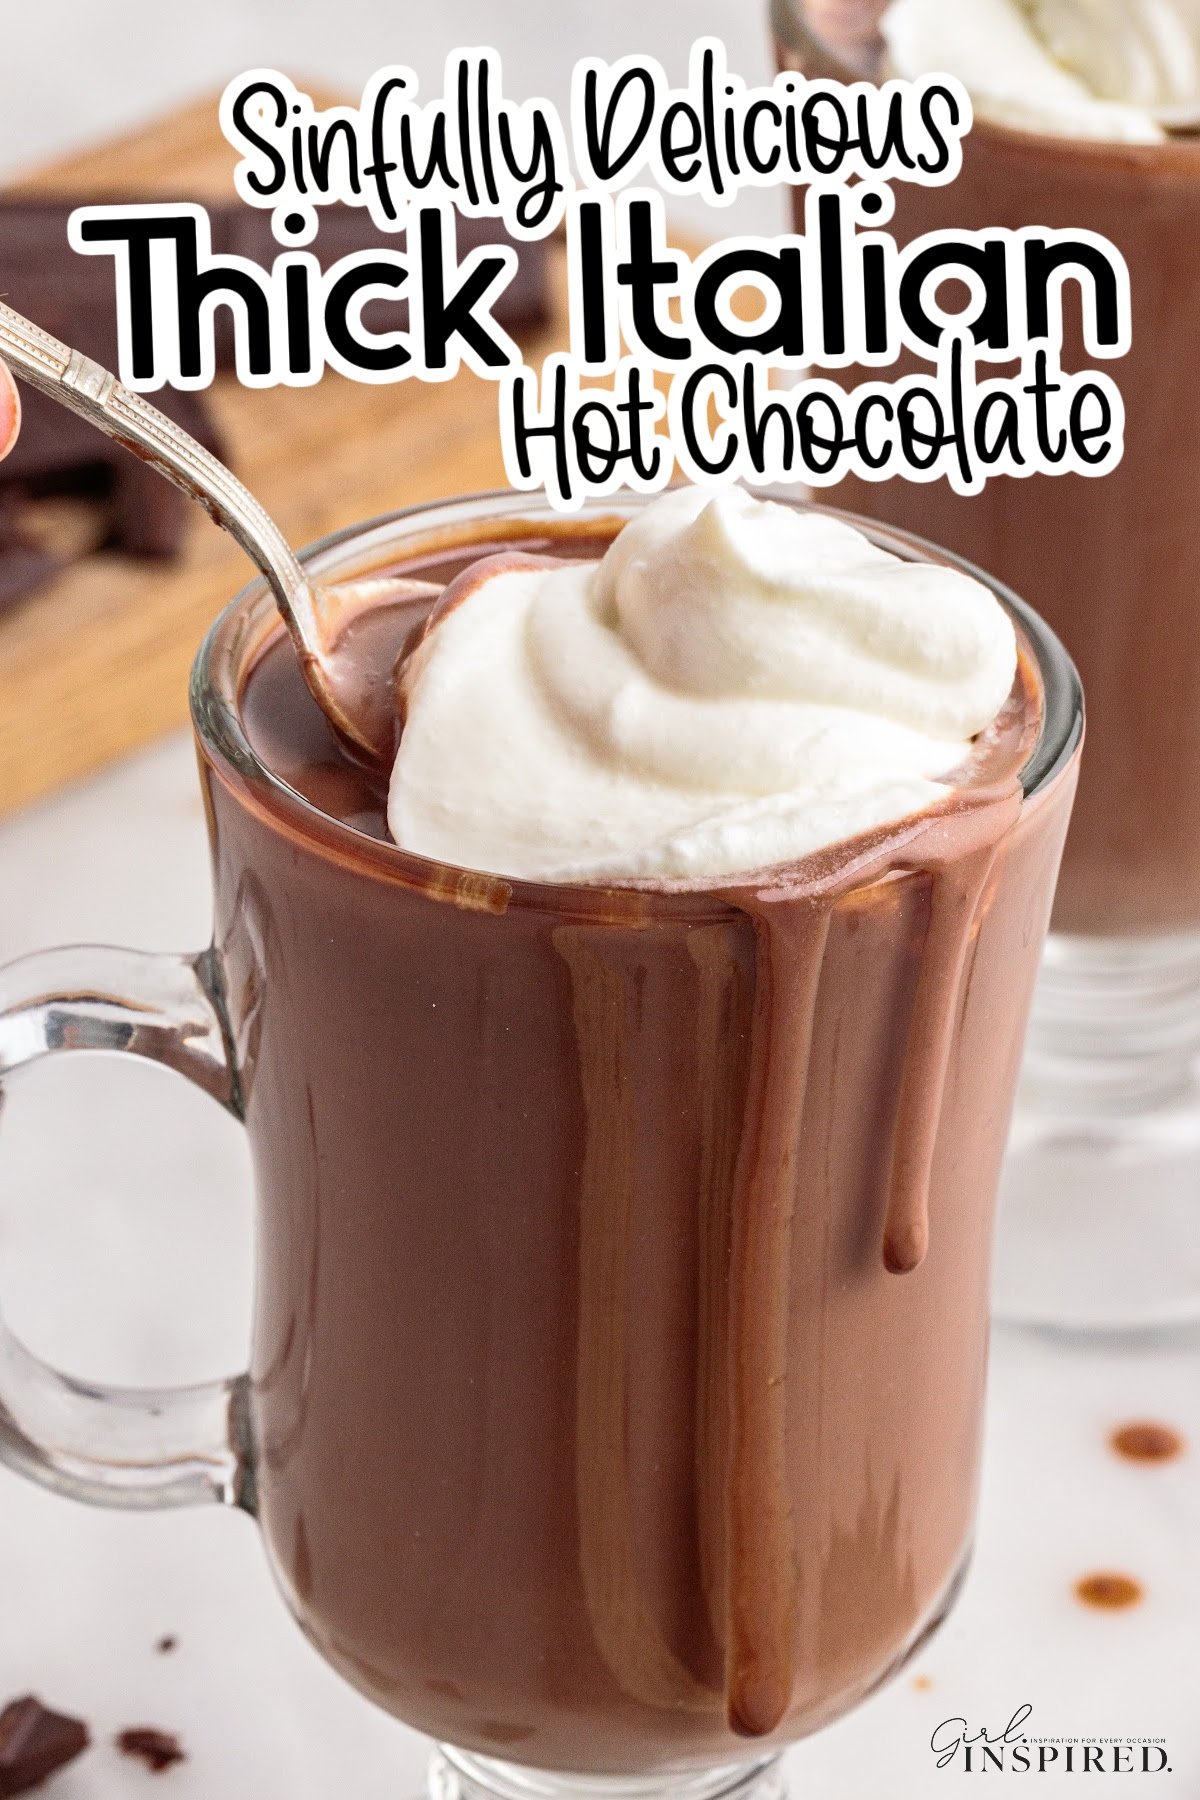 Glass mug of Italian hot chocolate topped with whipped cream with a spoon in it, and text overlay.